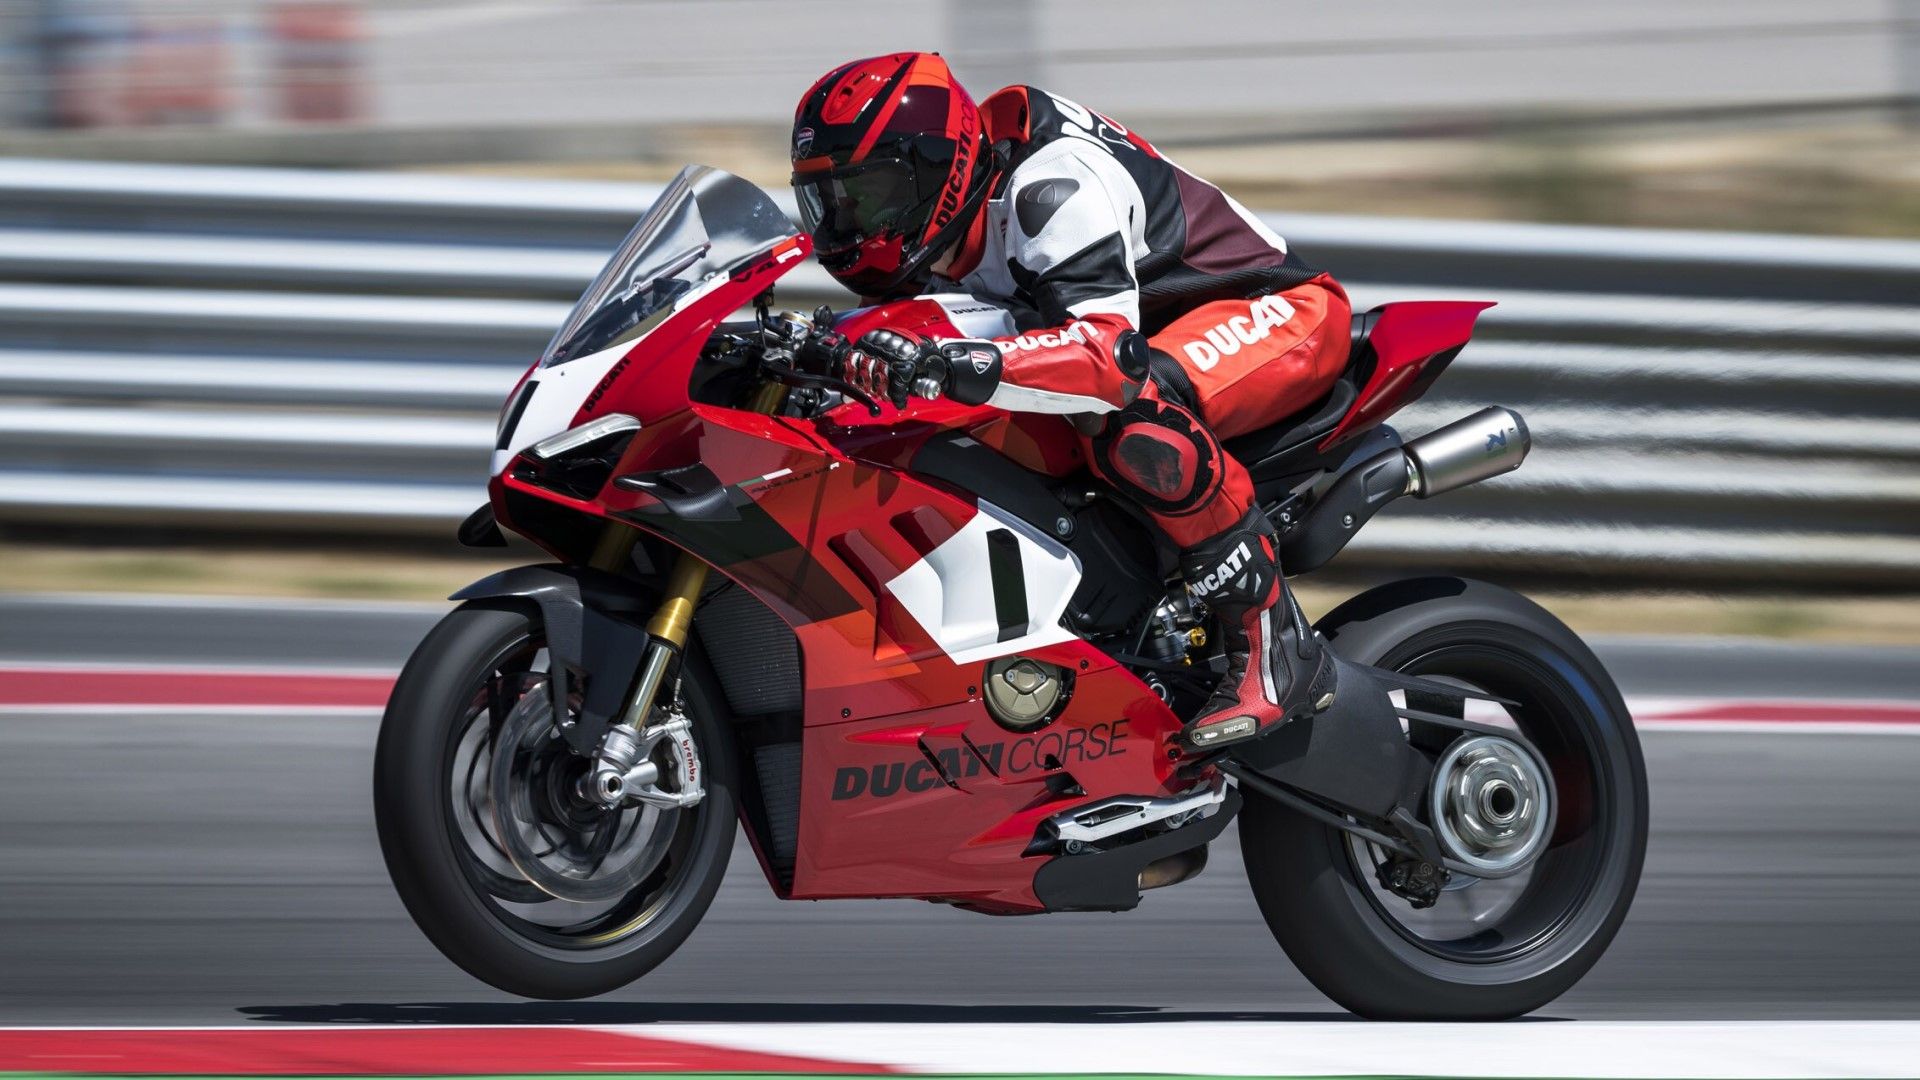 Ducati Panigale V4 R popping a wheelie side profile hd superbike wallpaper view